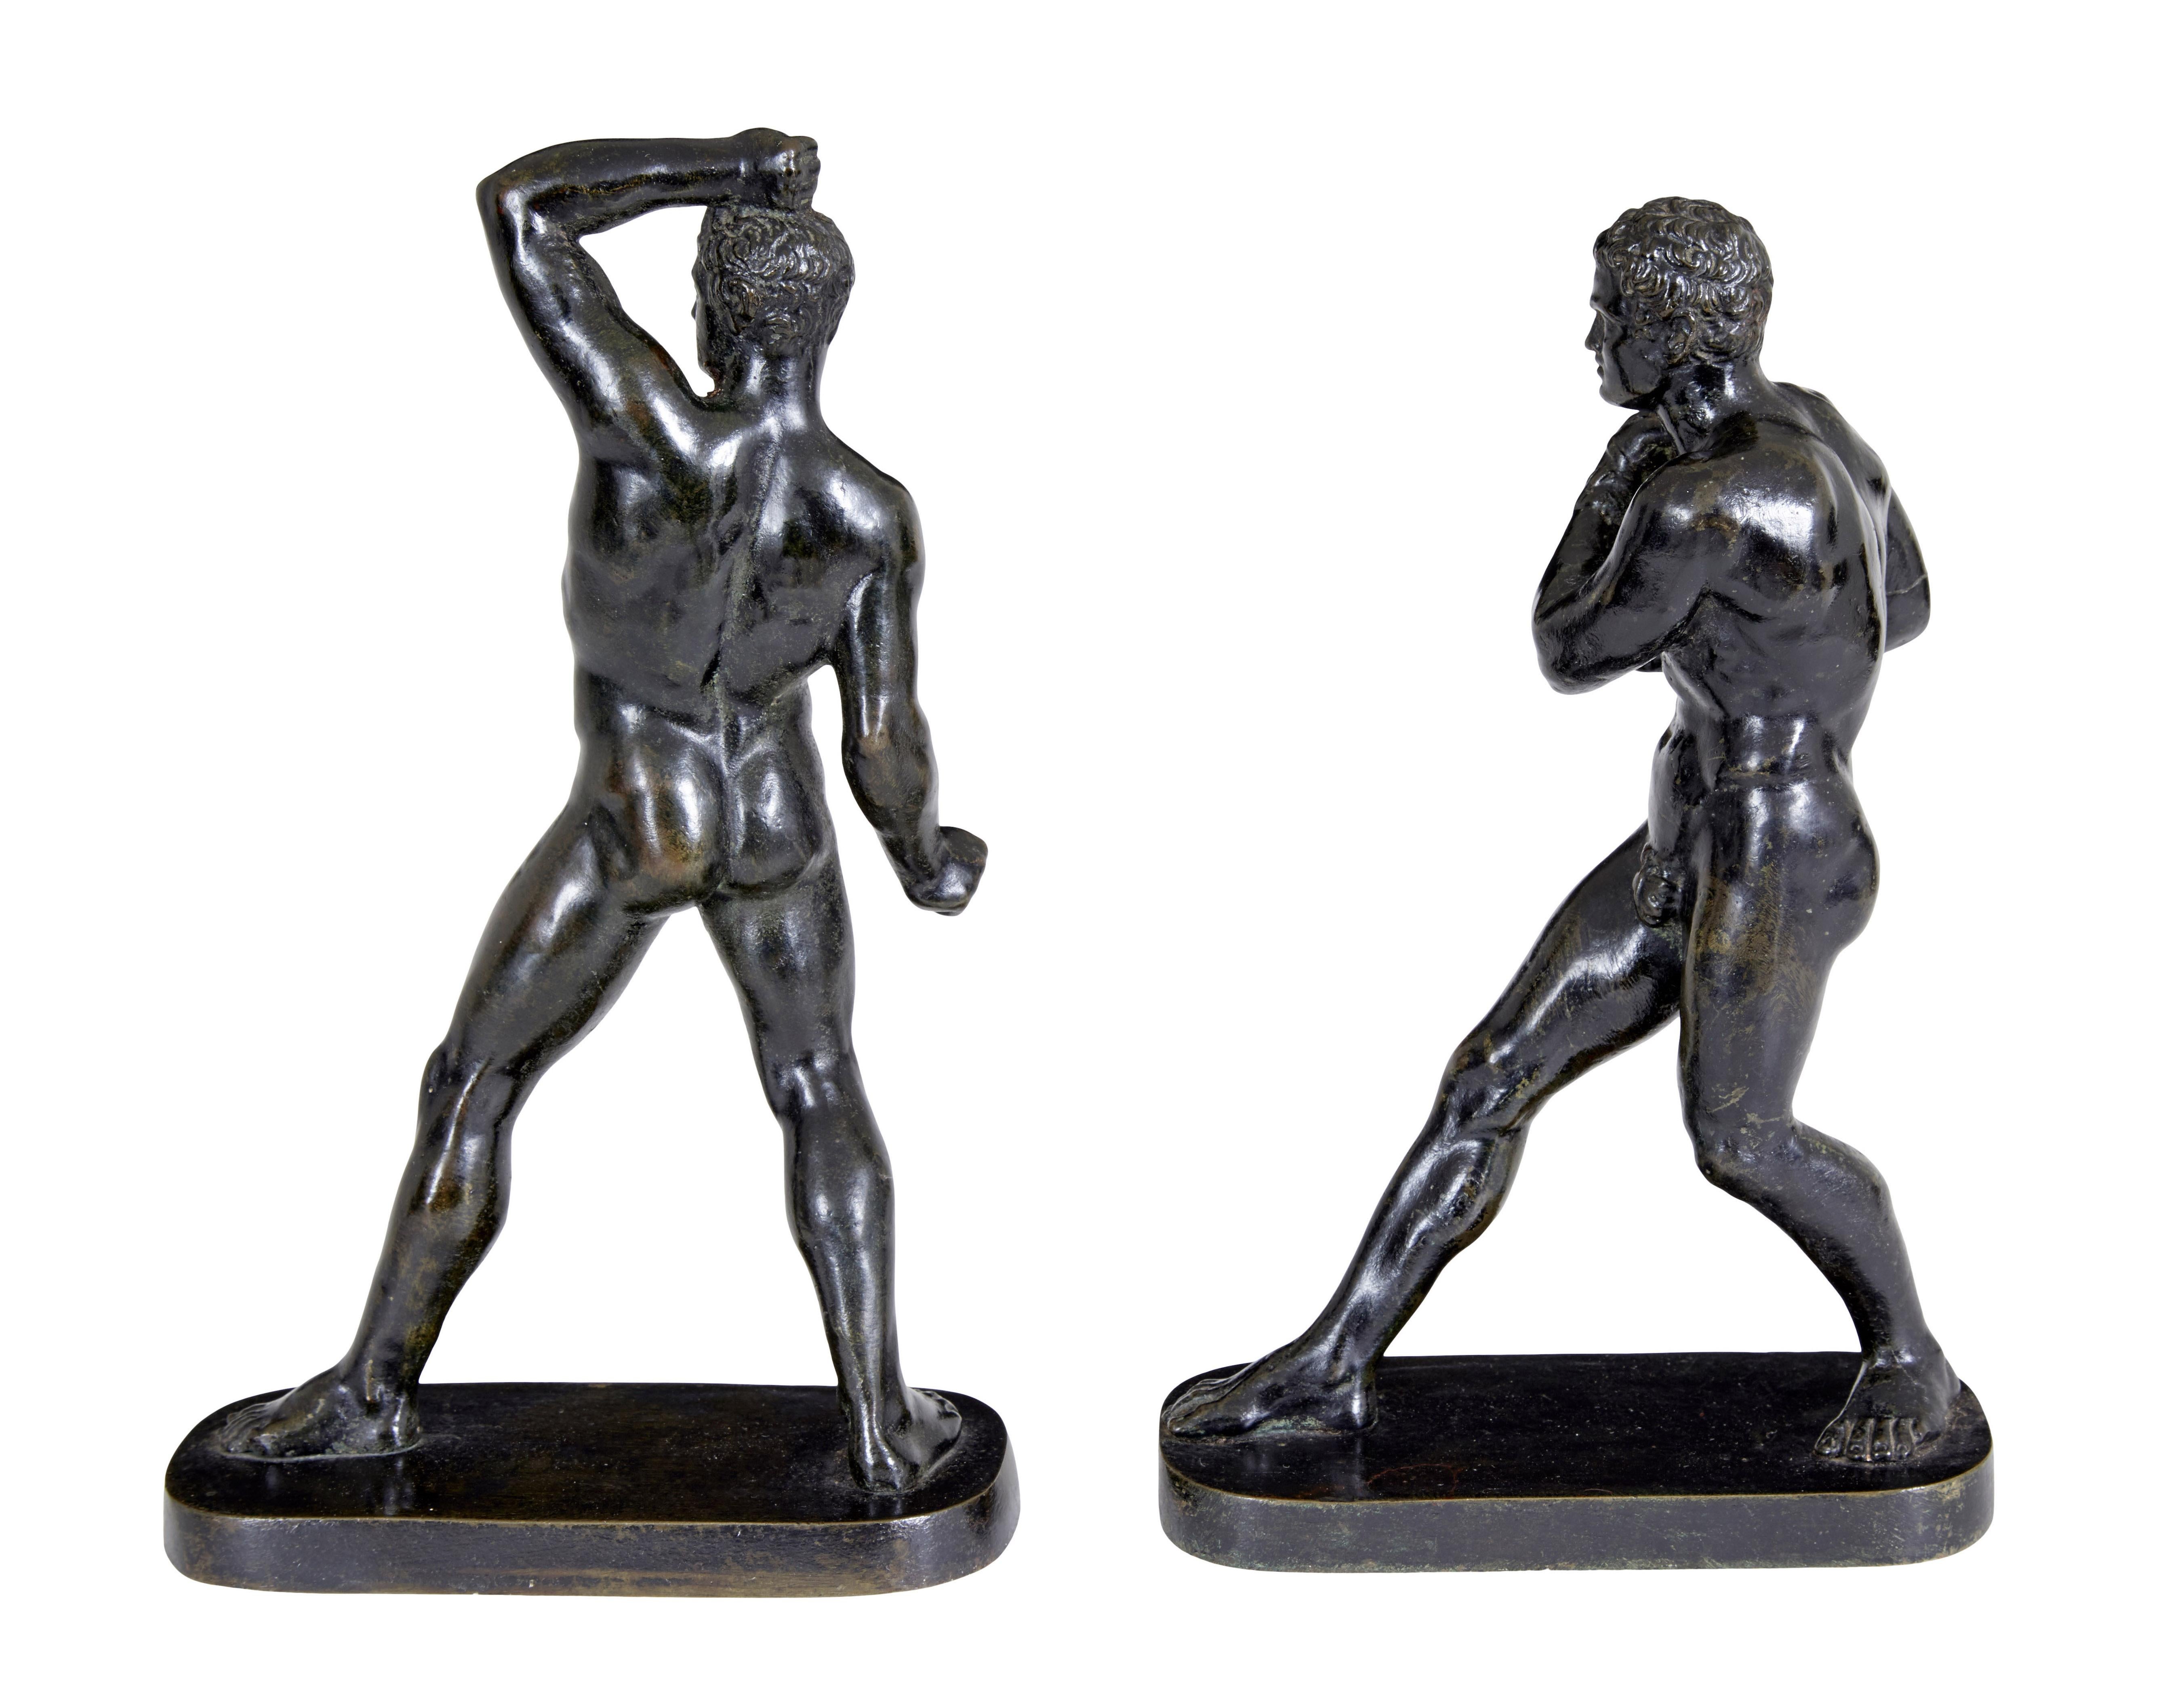 Neoclassical Pair of 19th Century Bronze Athlete Figures After Canova